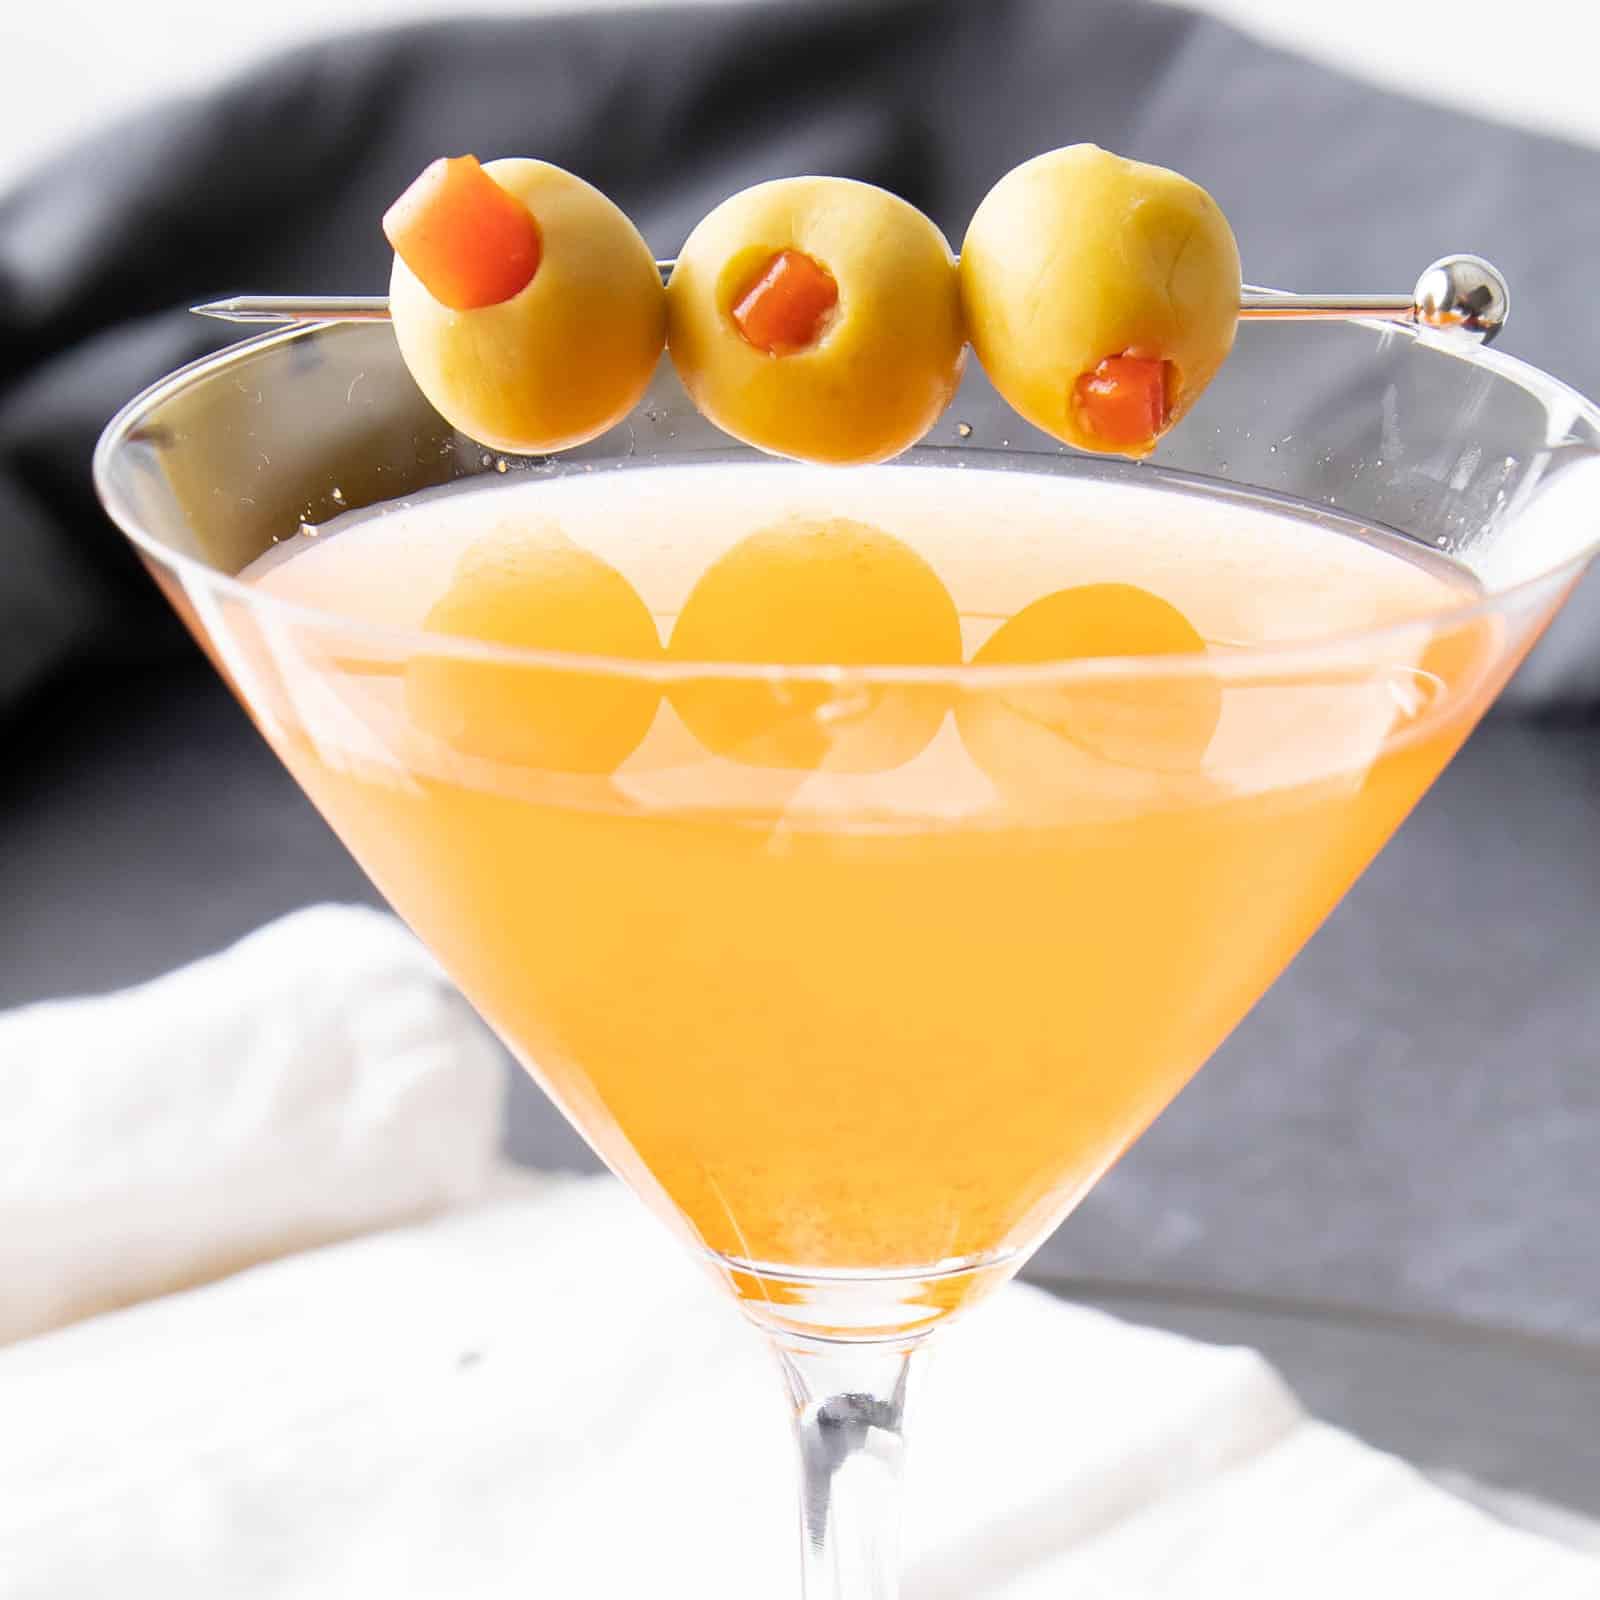 Hot & Dirty Martini featured image